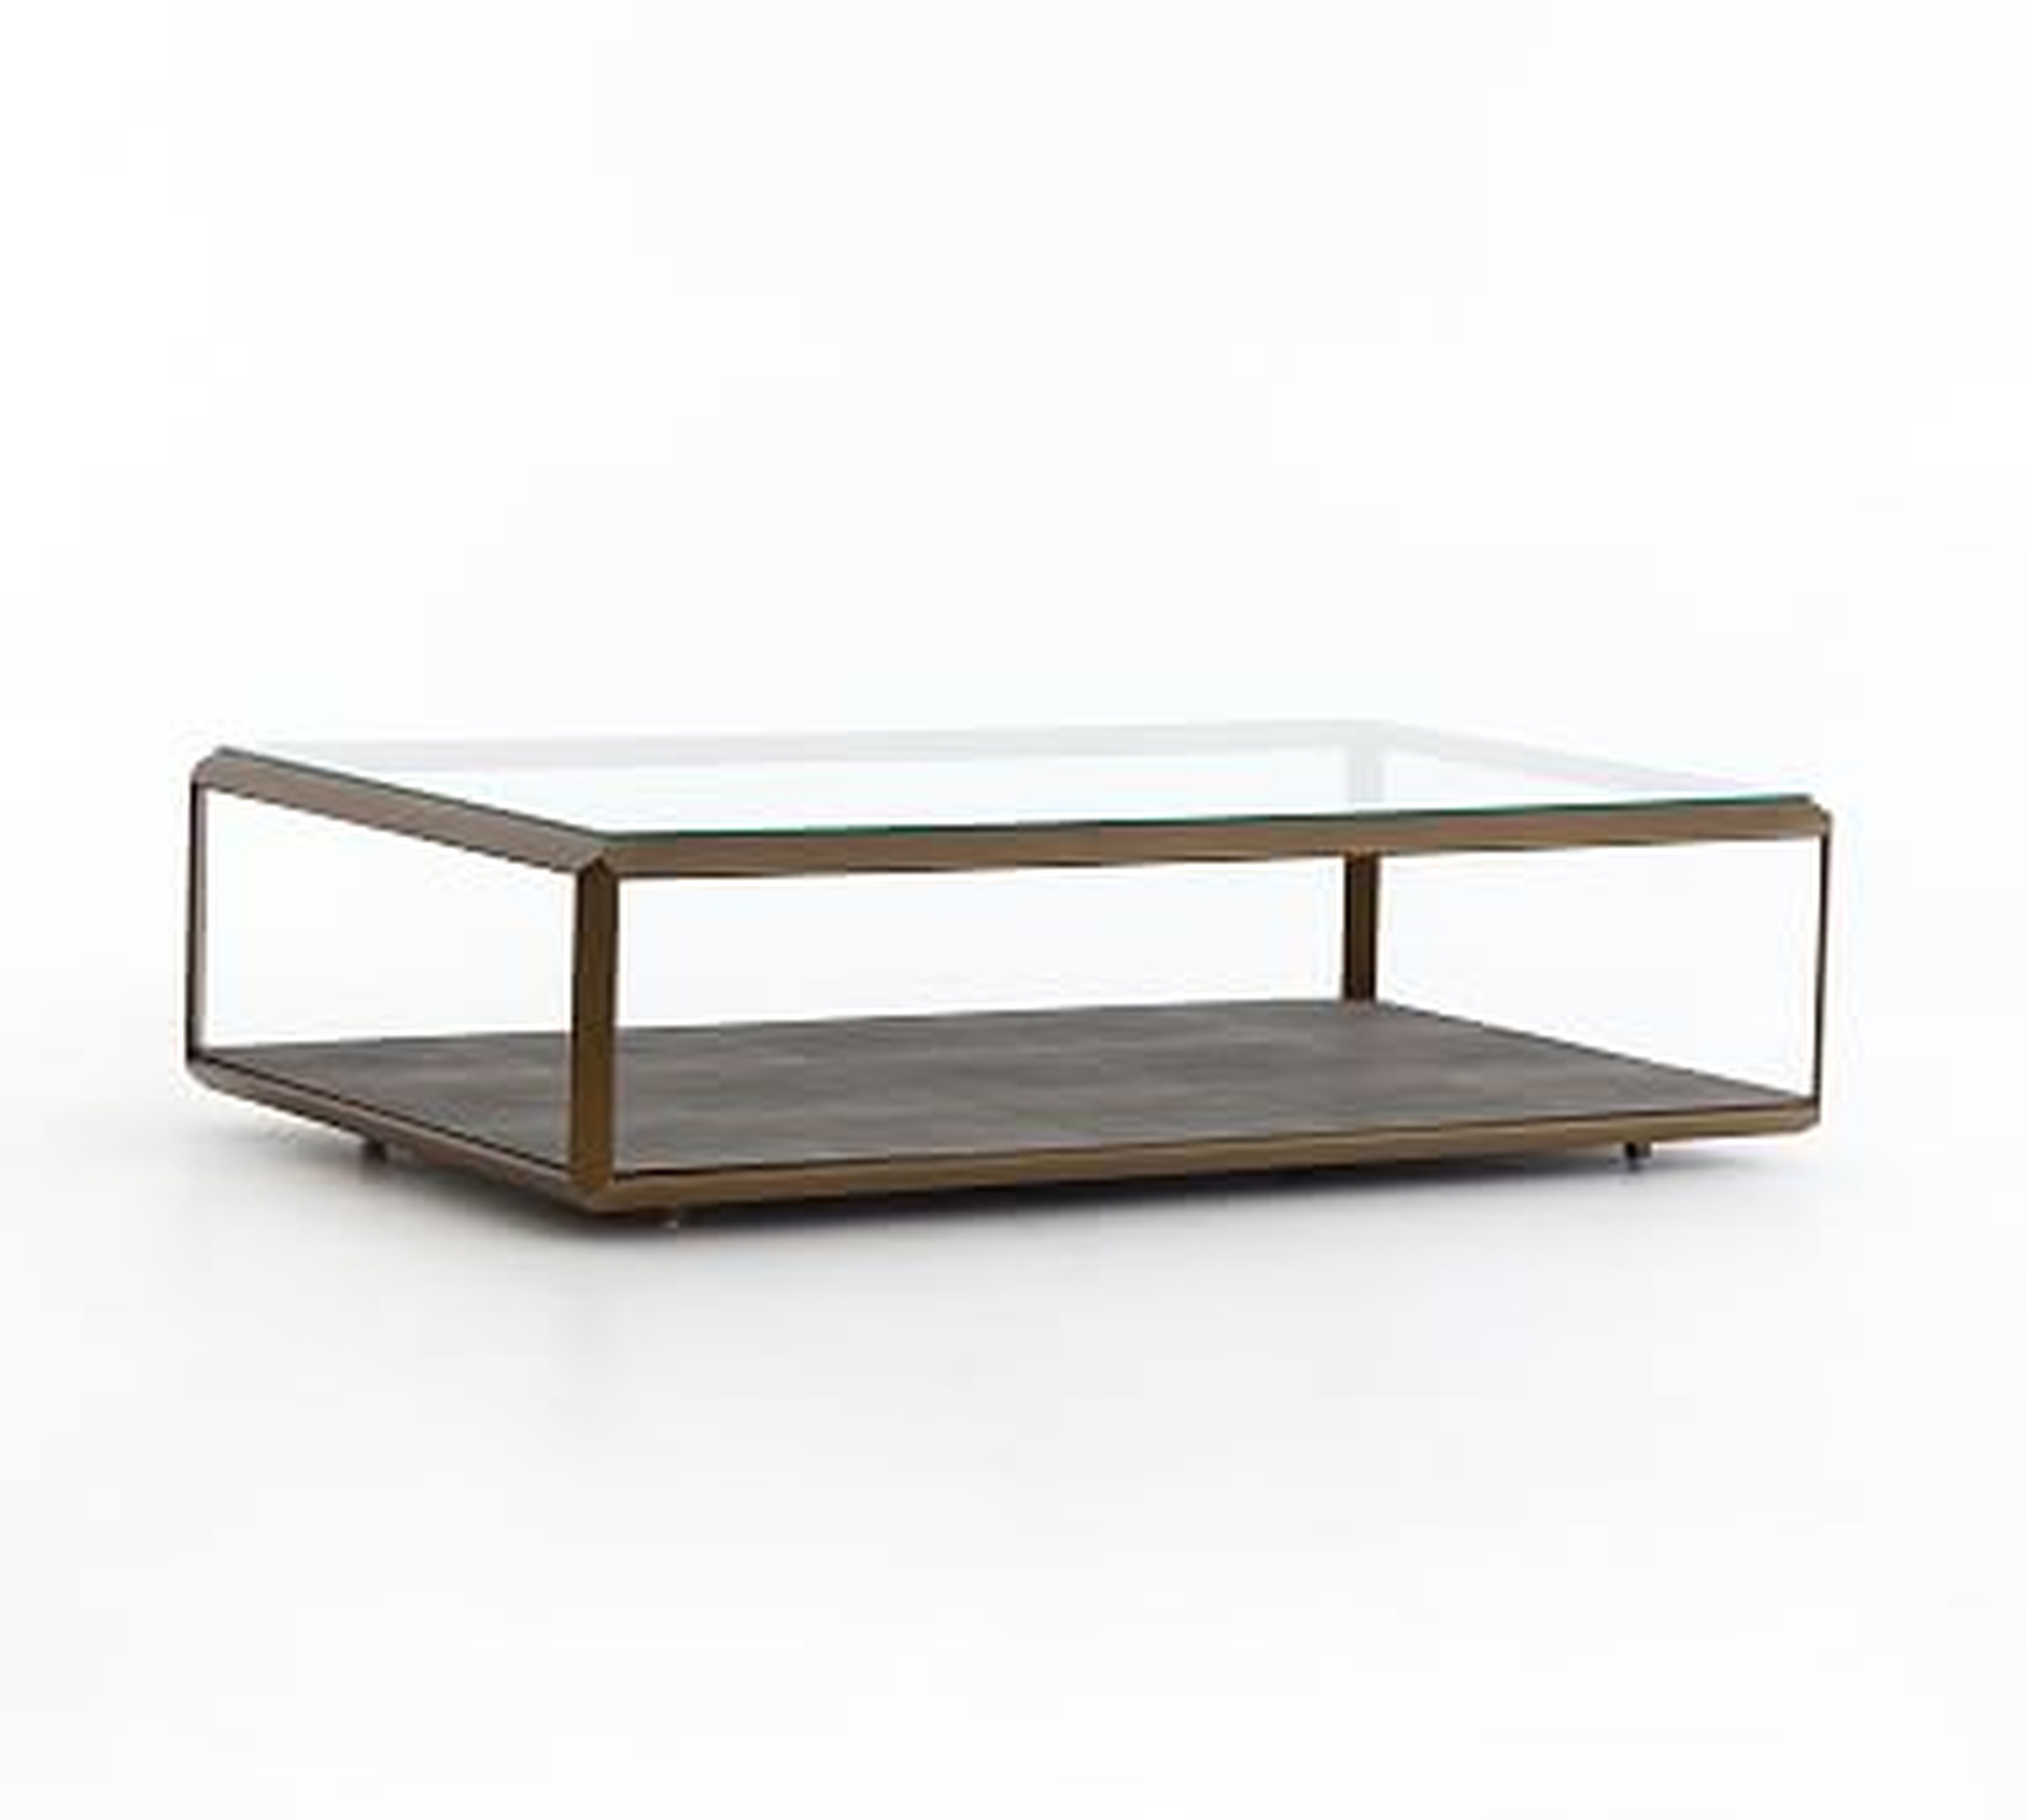 Doncaster Shagreen Coffee Table, Brown/Brass - Pottery Barn